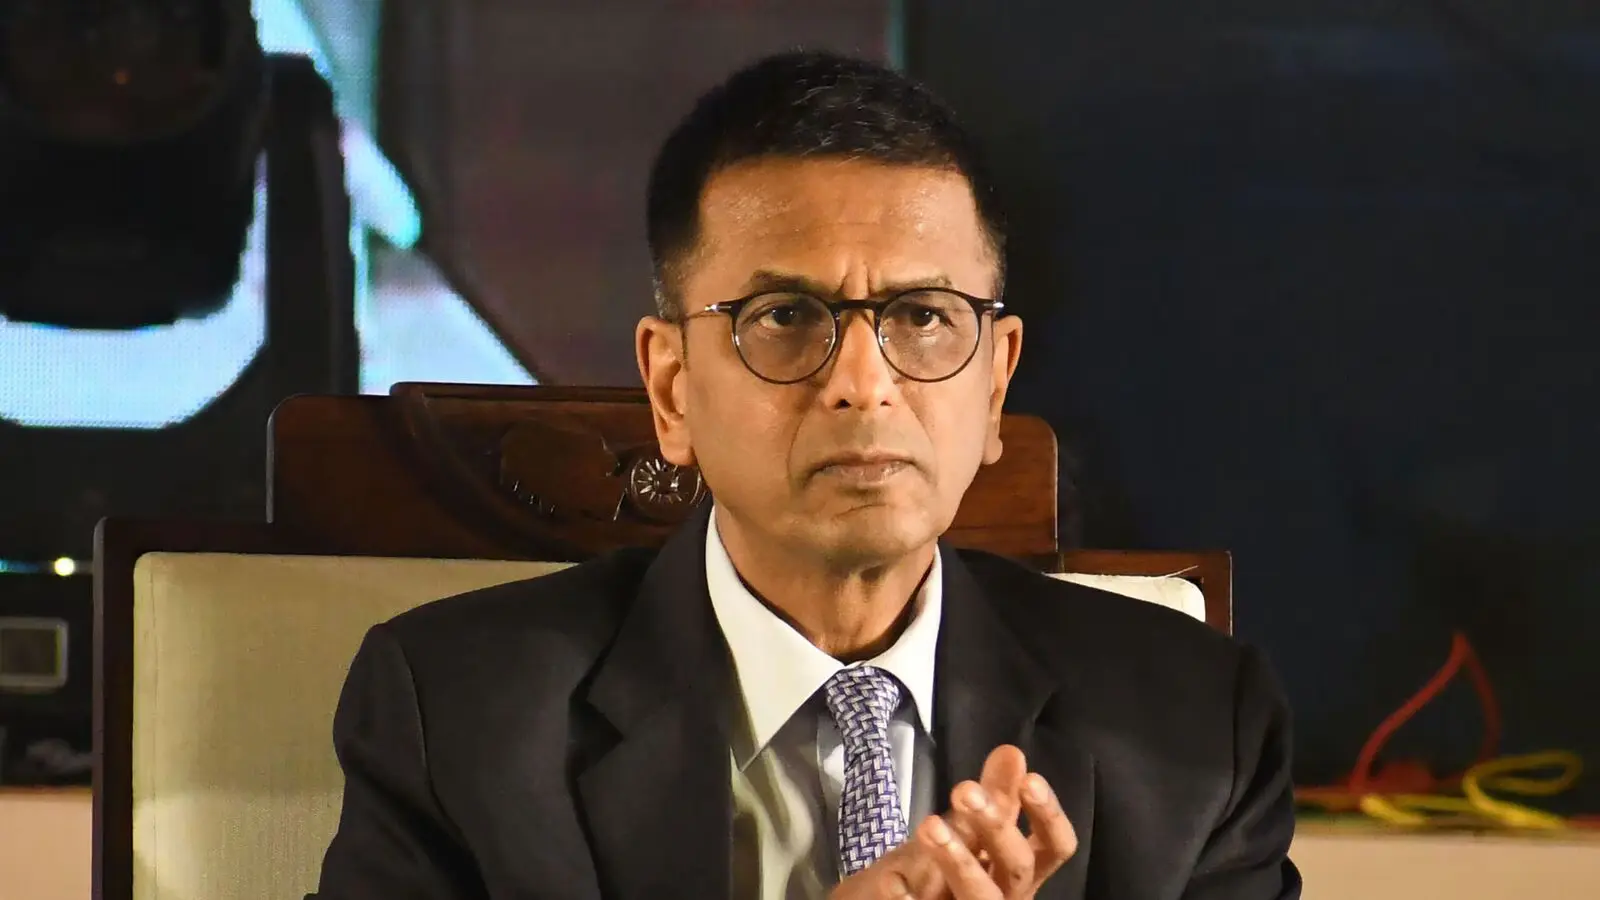 CJI Chandrachud Stresses Green Life, Says Climate Change Can No Longer Be Ignored